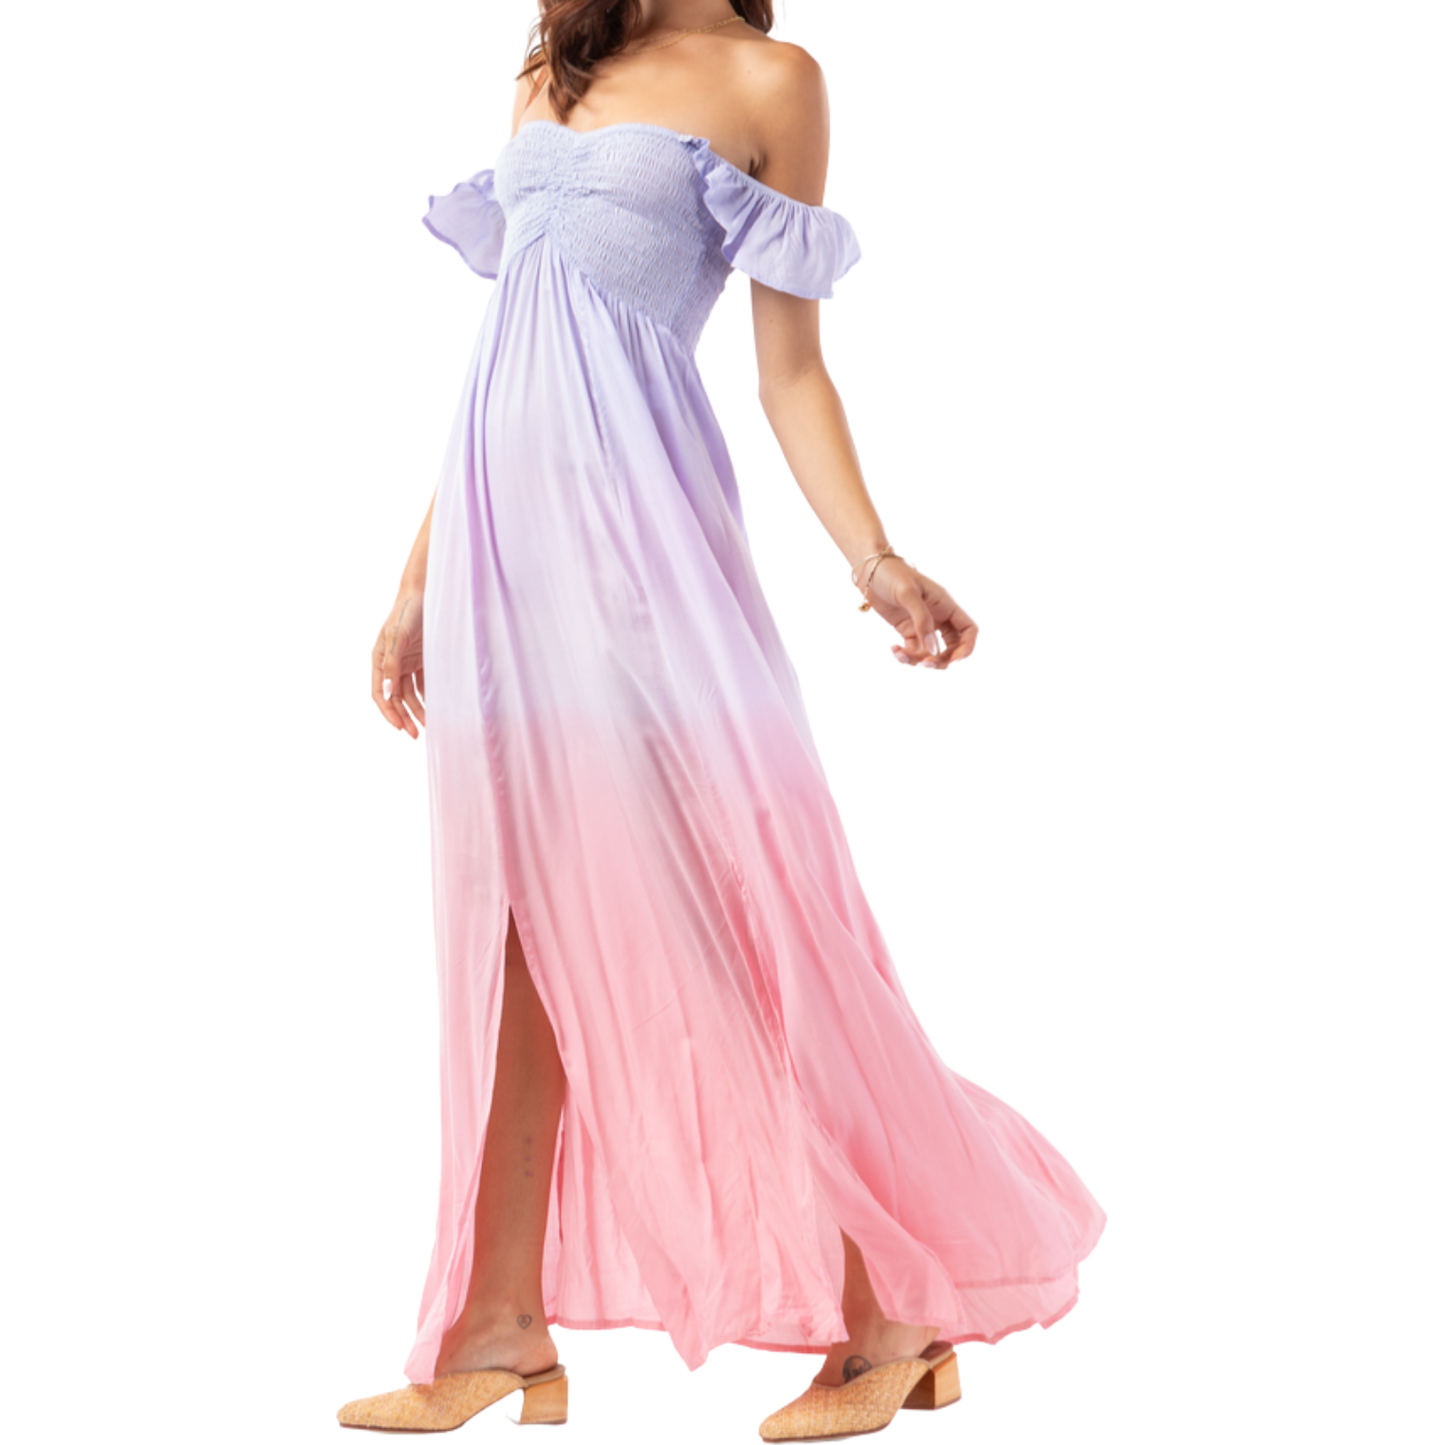 Load image into Gallery viewer, Tiare Hawaii Hollie Pink Violet Ombré Dress (1 Size)
